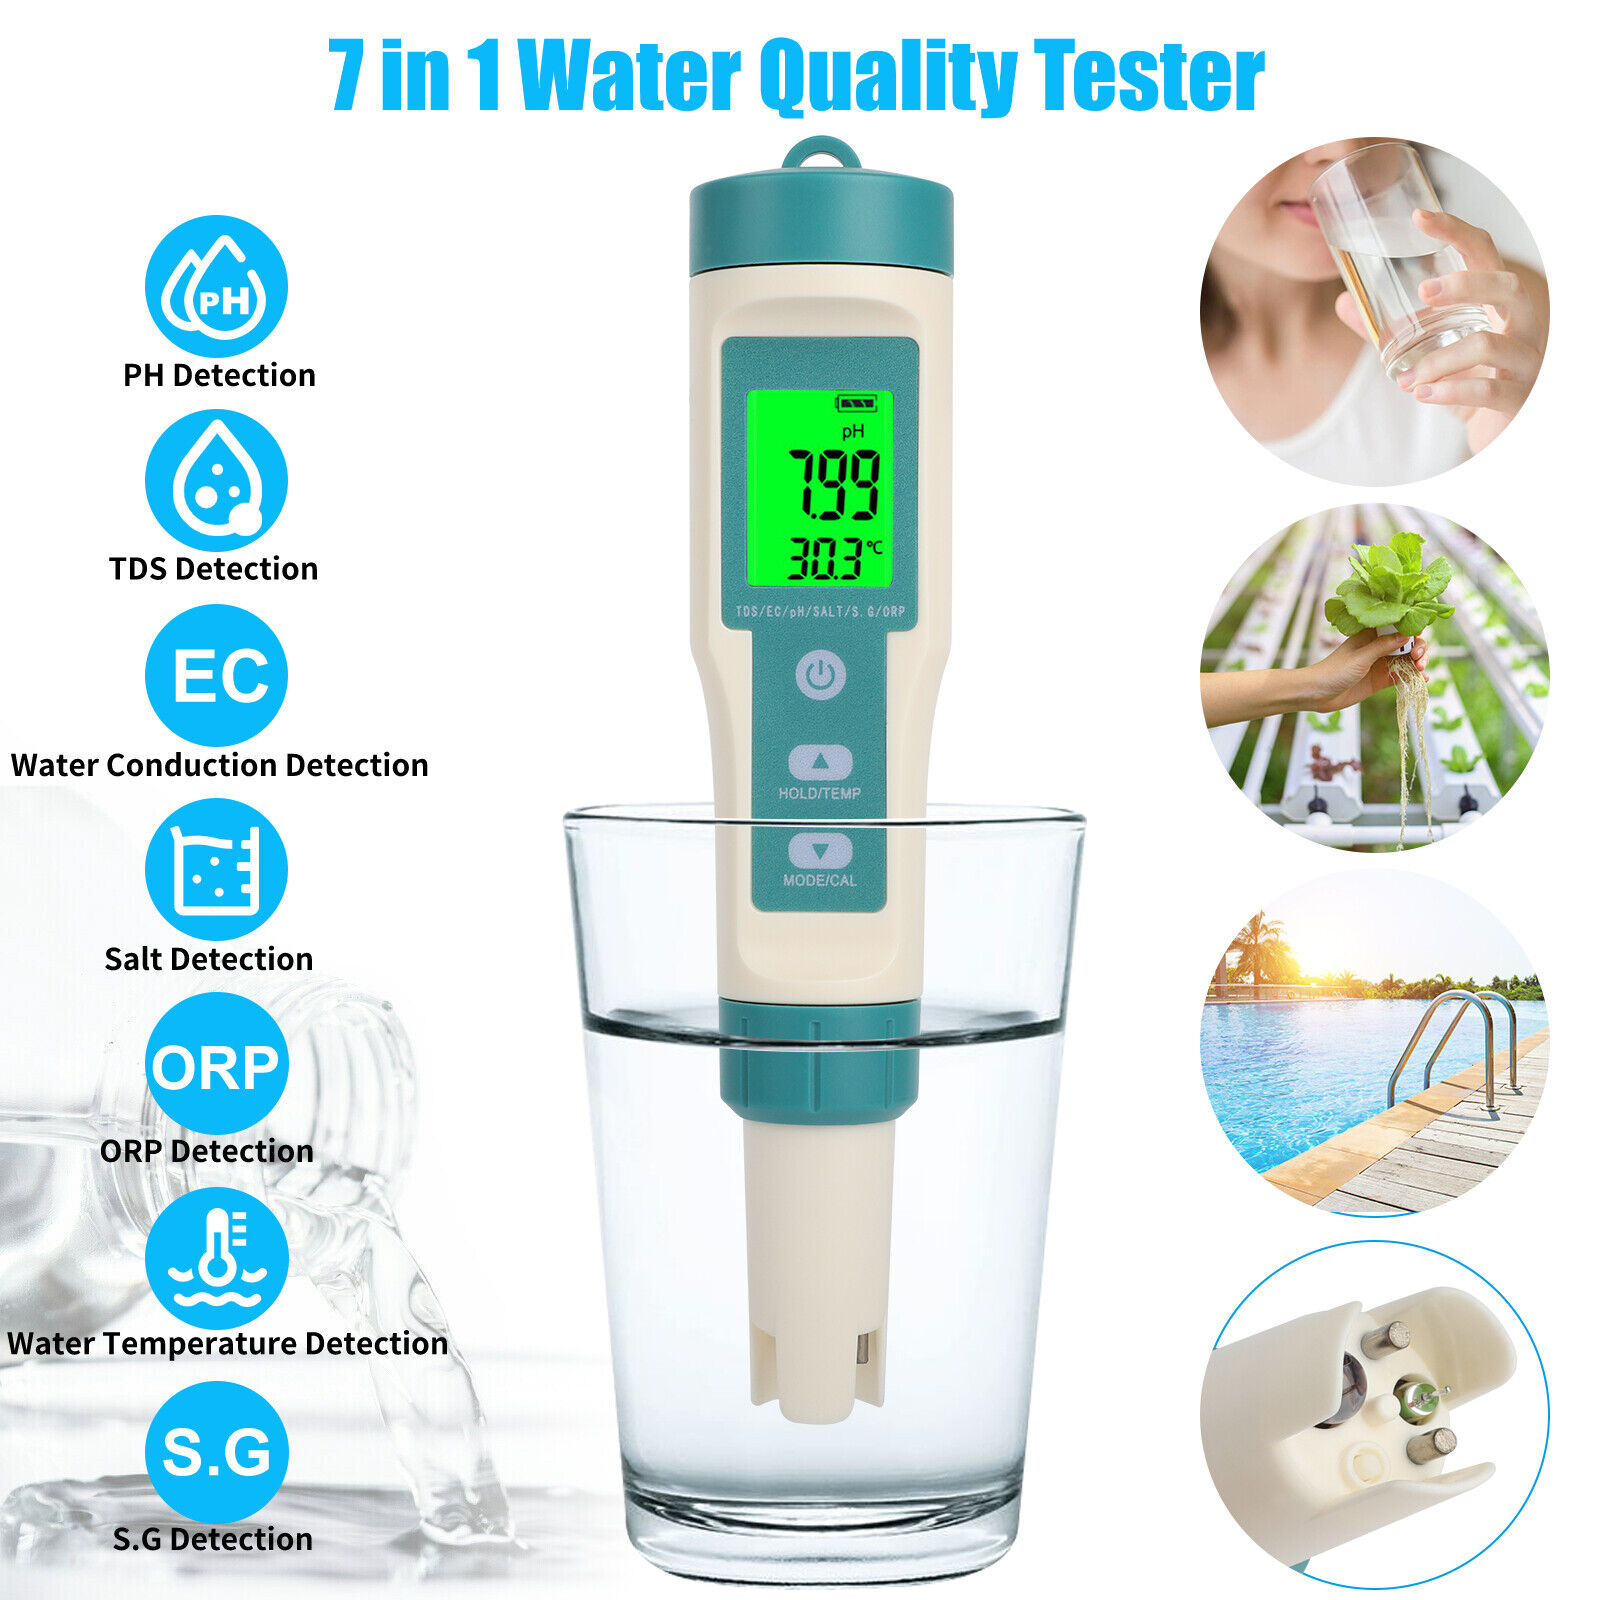 Digital PH Tester 7 In 1 TDS/EC/ORP/Temp/PH Meter Test Water Quality Monitor PH Tester For Household Drinking Hydroponics